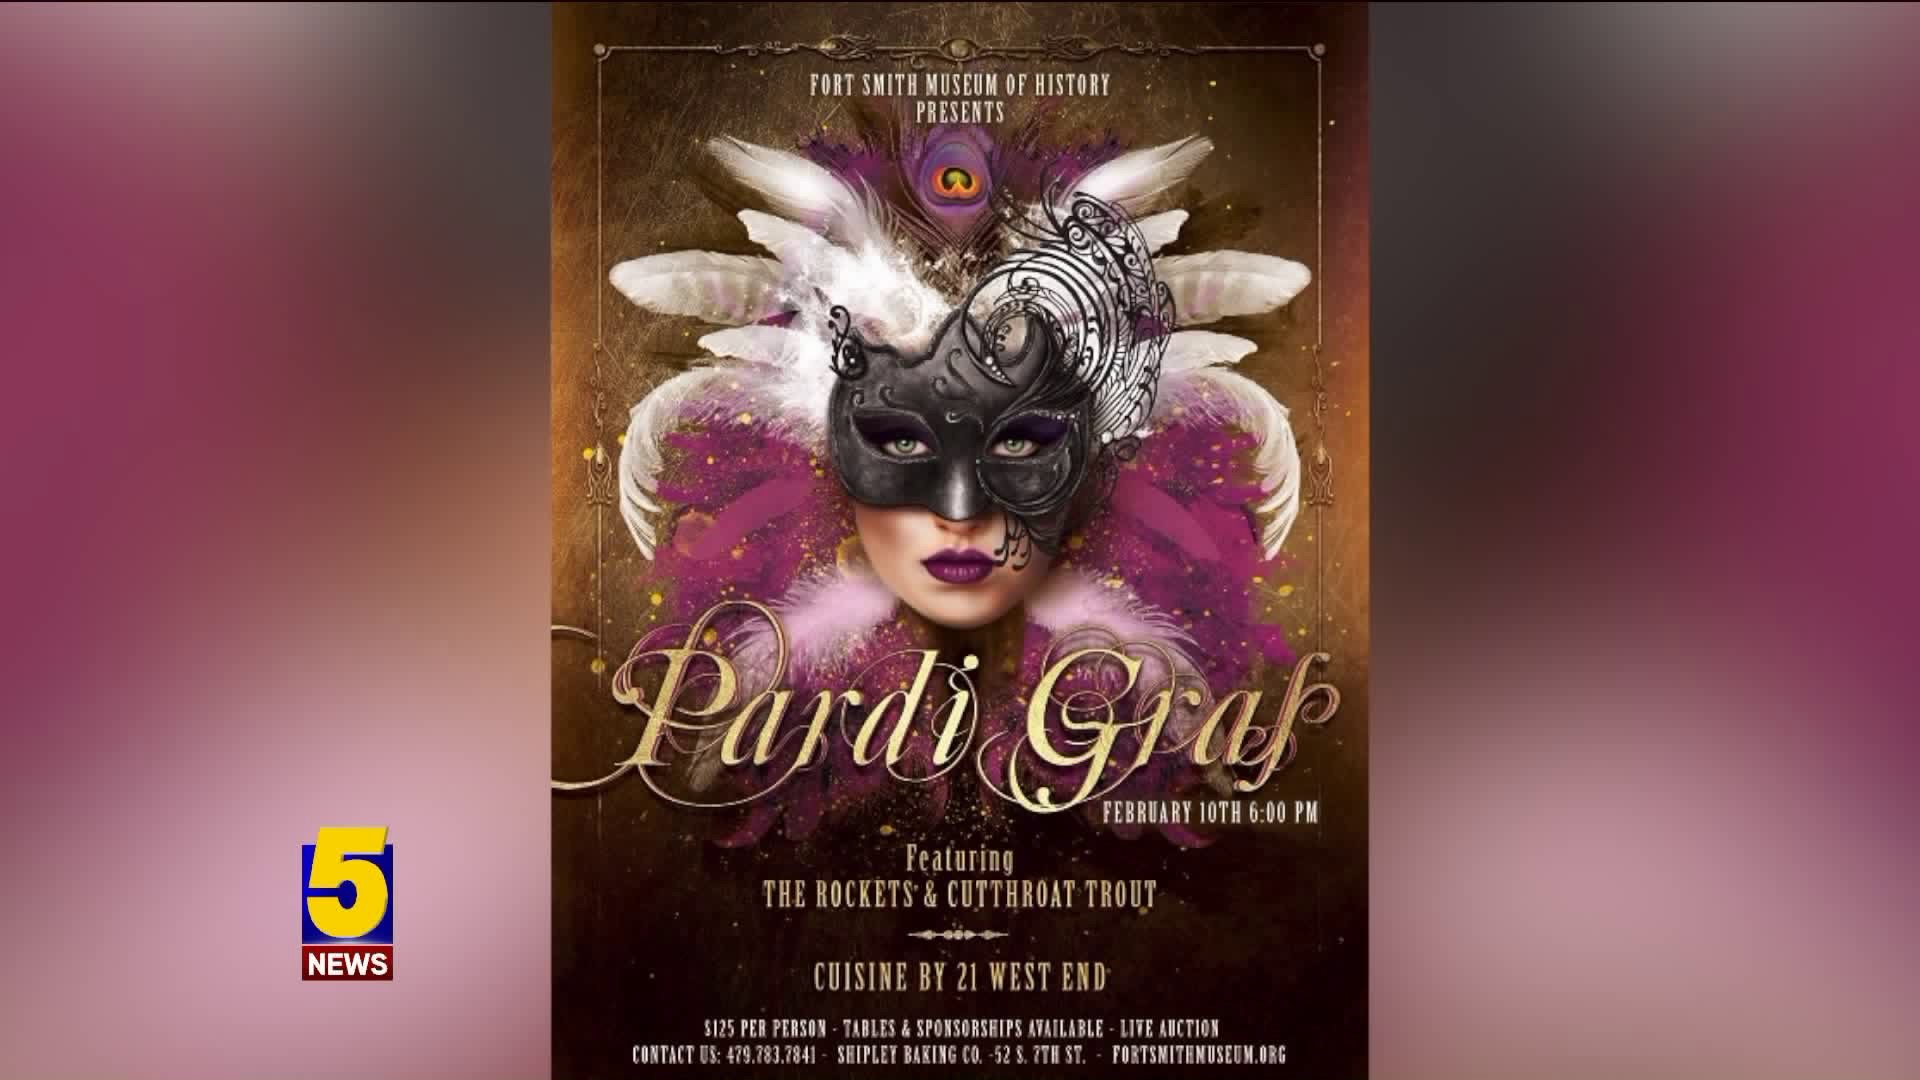 Fort Smith Museum To Host Pardigras